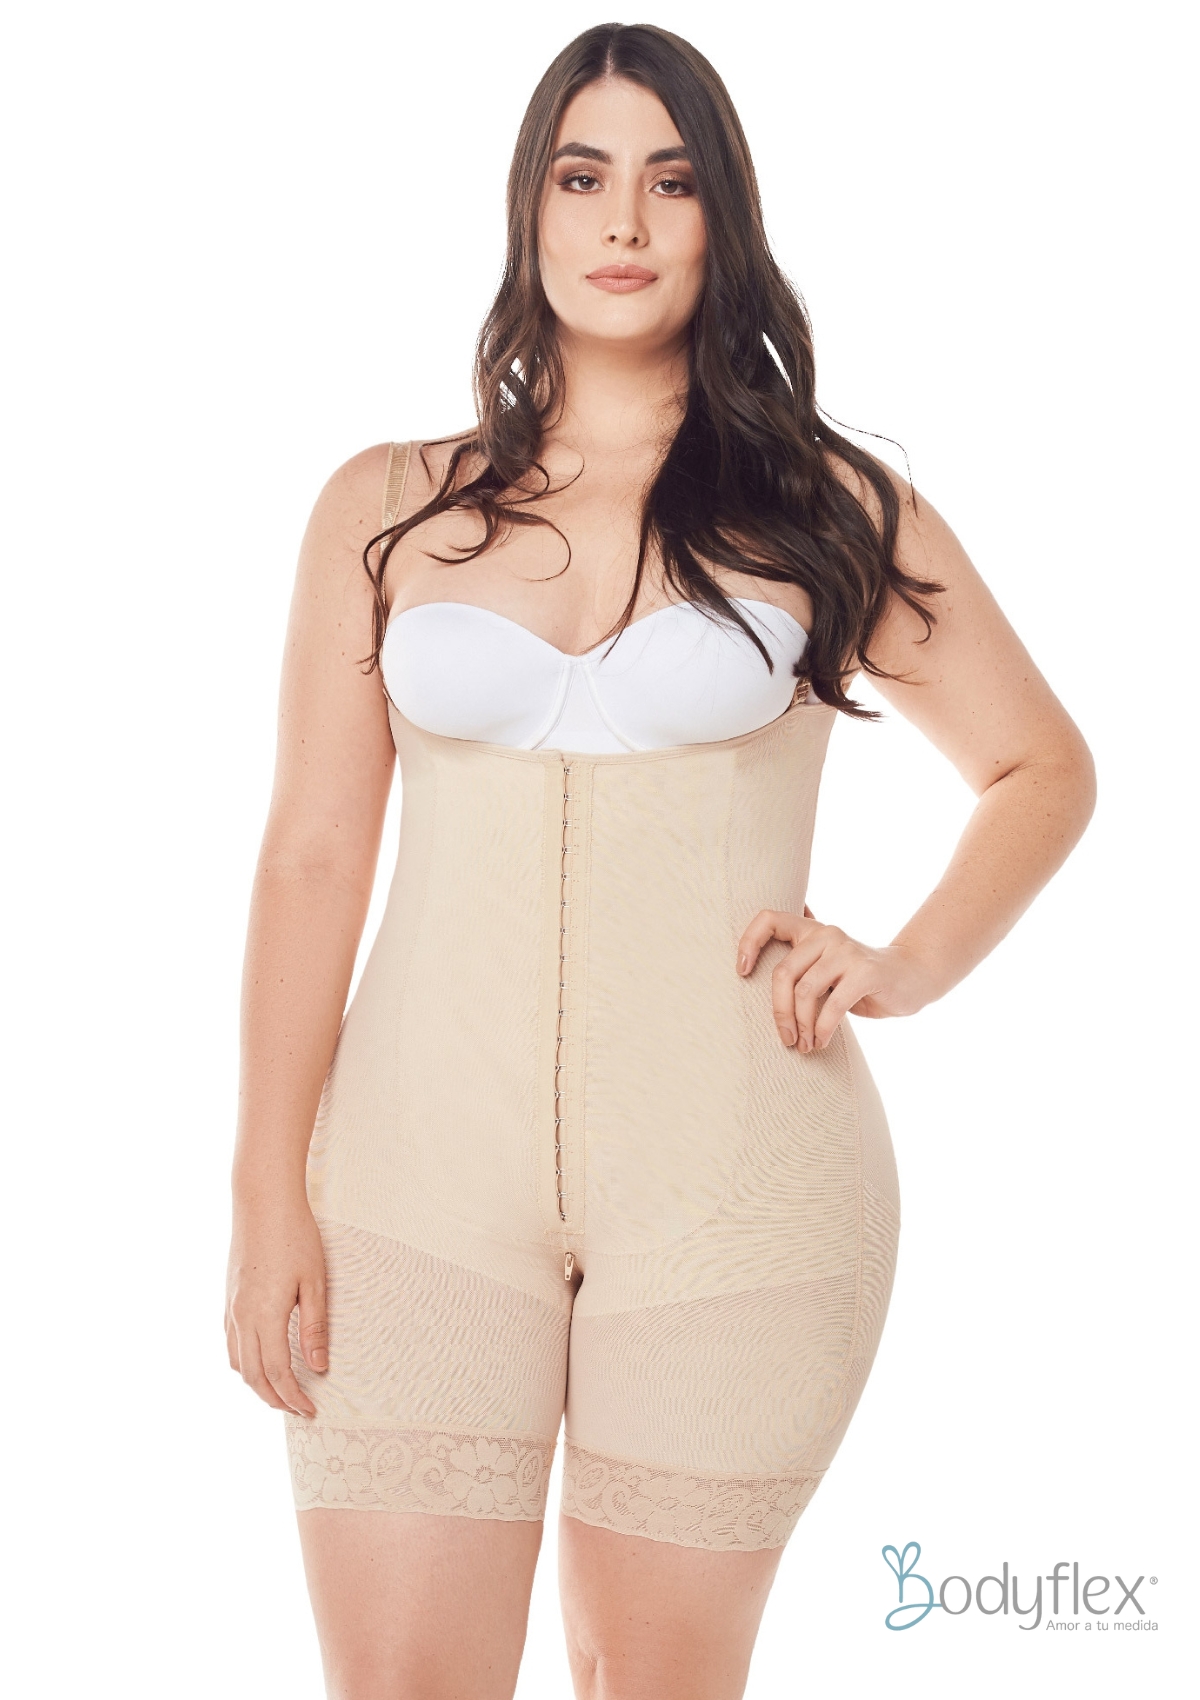 Electra Plus Size High Compression Shaper with Butt Lifter - Zeta Curves